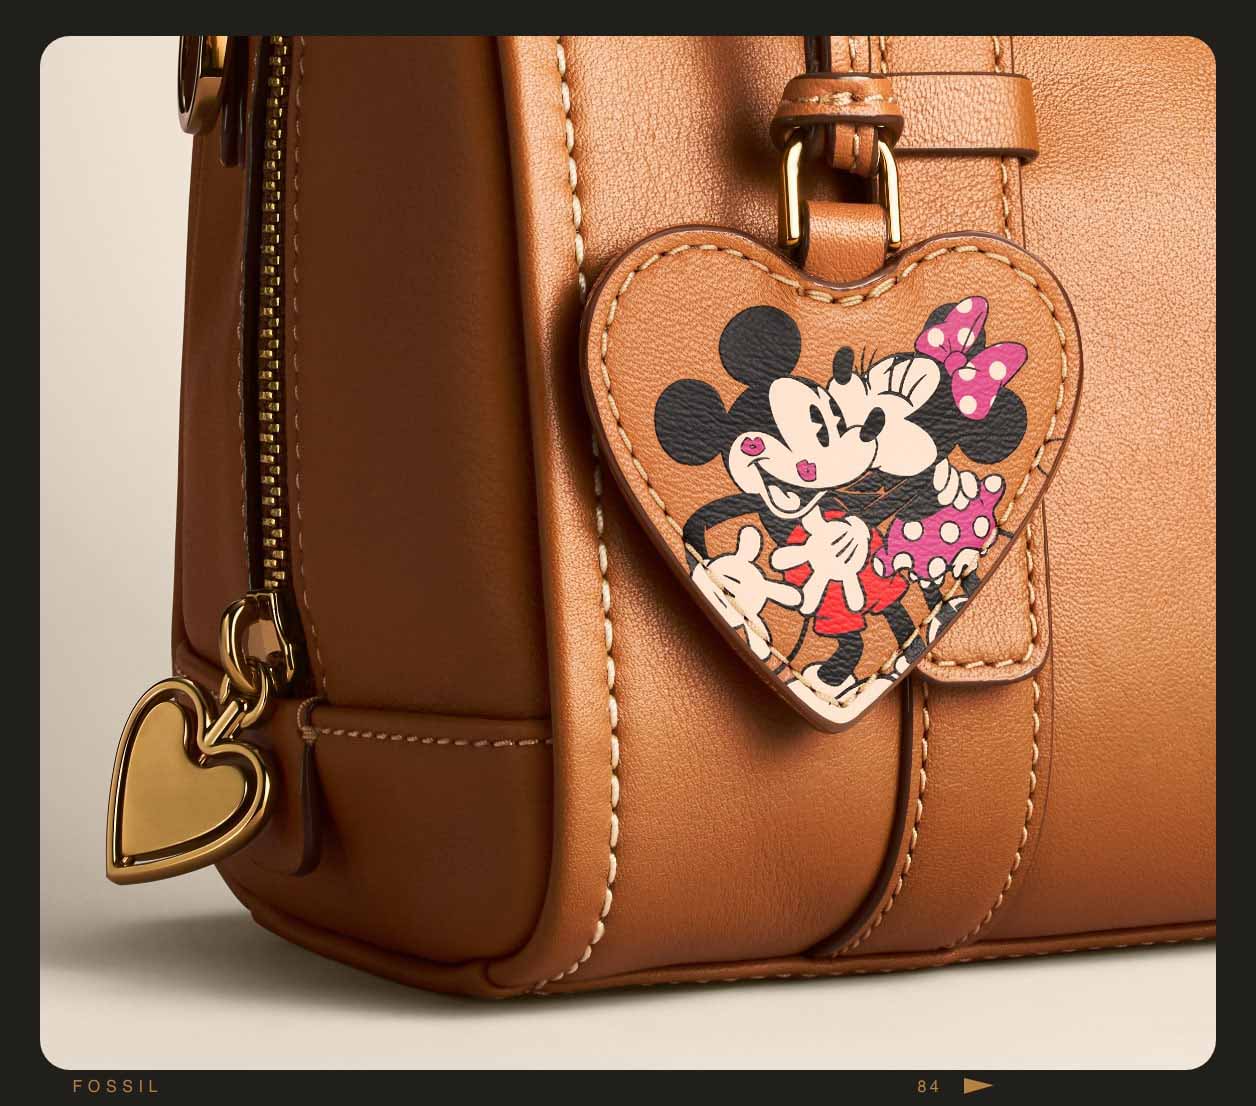 A closeup of the brown leather Carlie Mini satchel, showcasing the embossed Mickey Mouse and Minnie Mouse graphic.